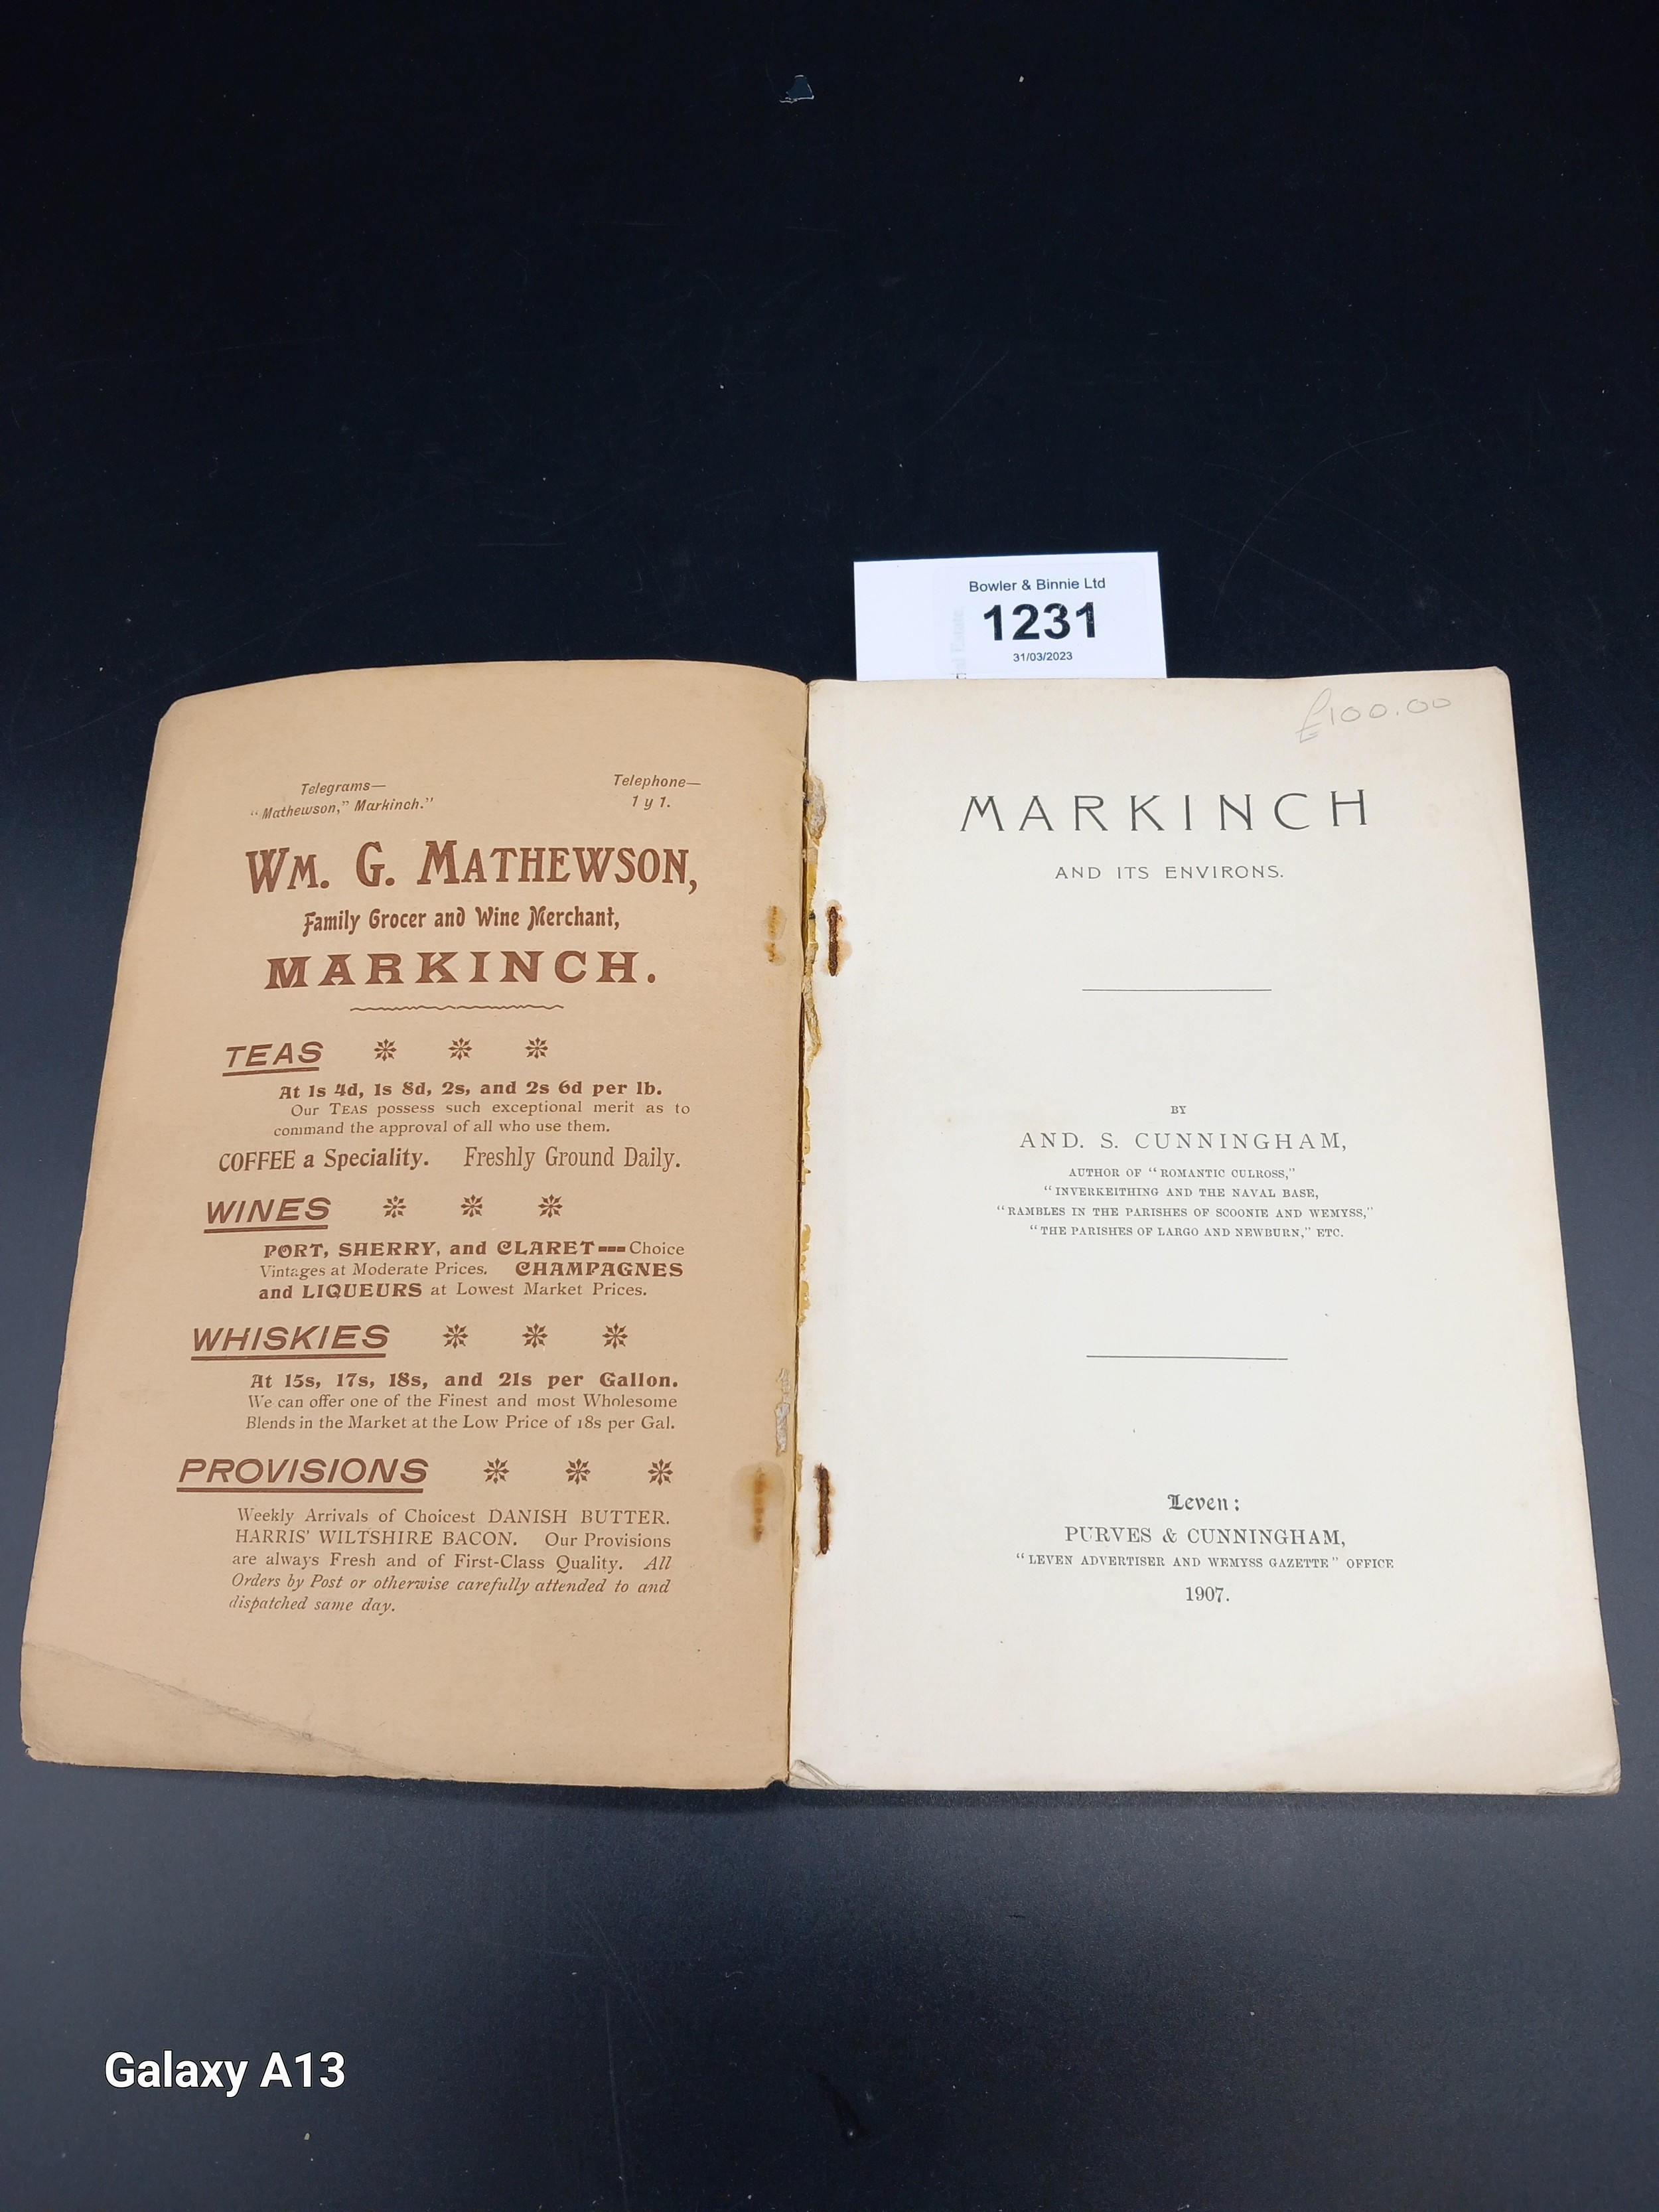 Markinch And Its Environs By And . S. Cunningham, Leven: Purves & Cunningham 1907 [Paper Back] - Image 3 of 7